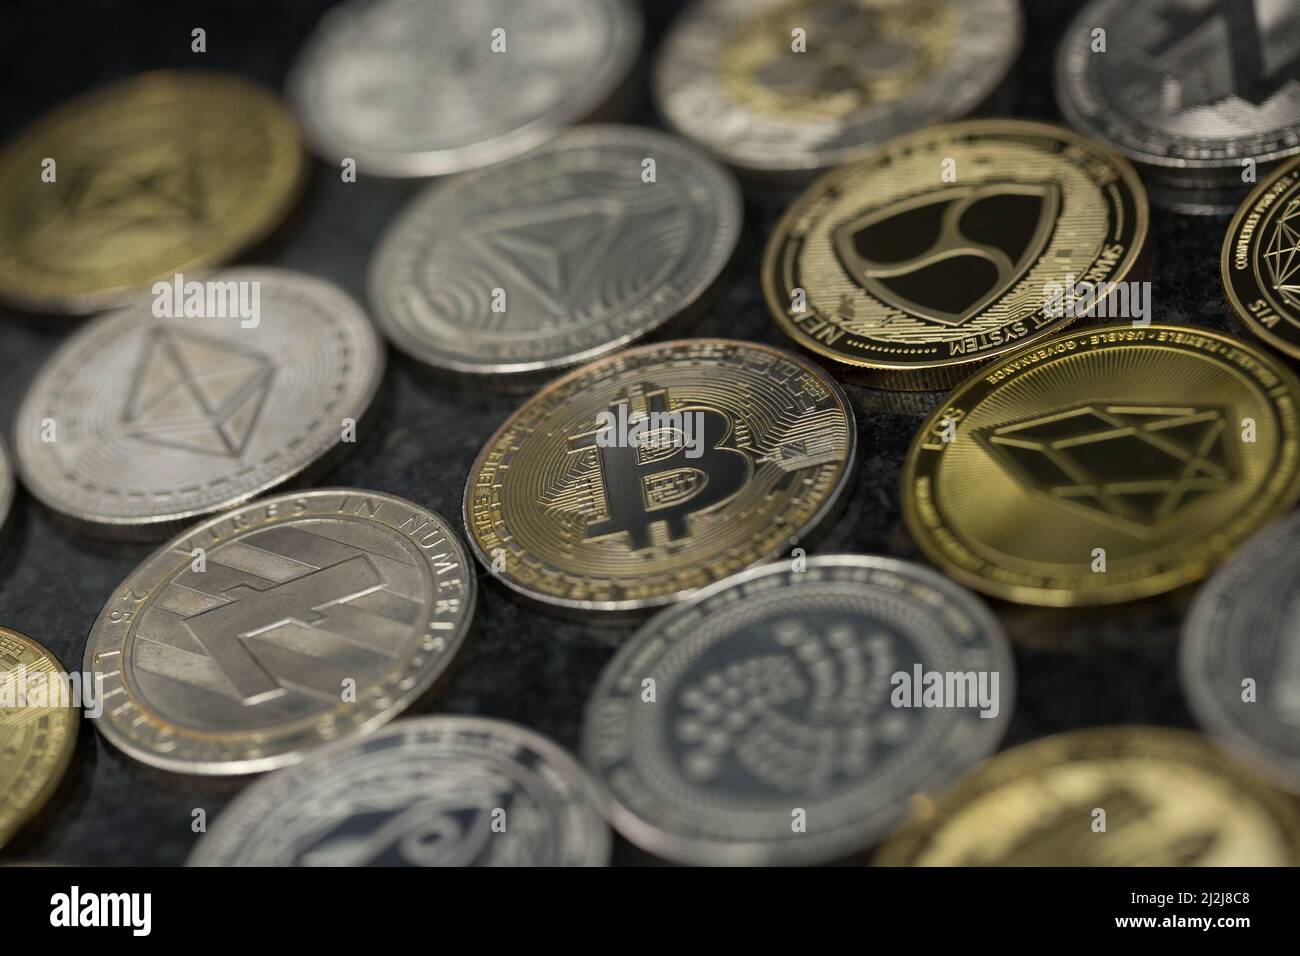 Bitcoin Cryptocurrency physical coin surrounded with variety of other crypto altcoins. Stock Photo